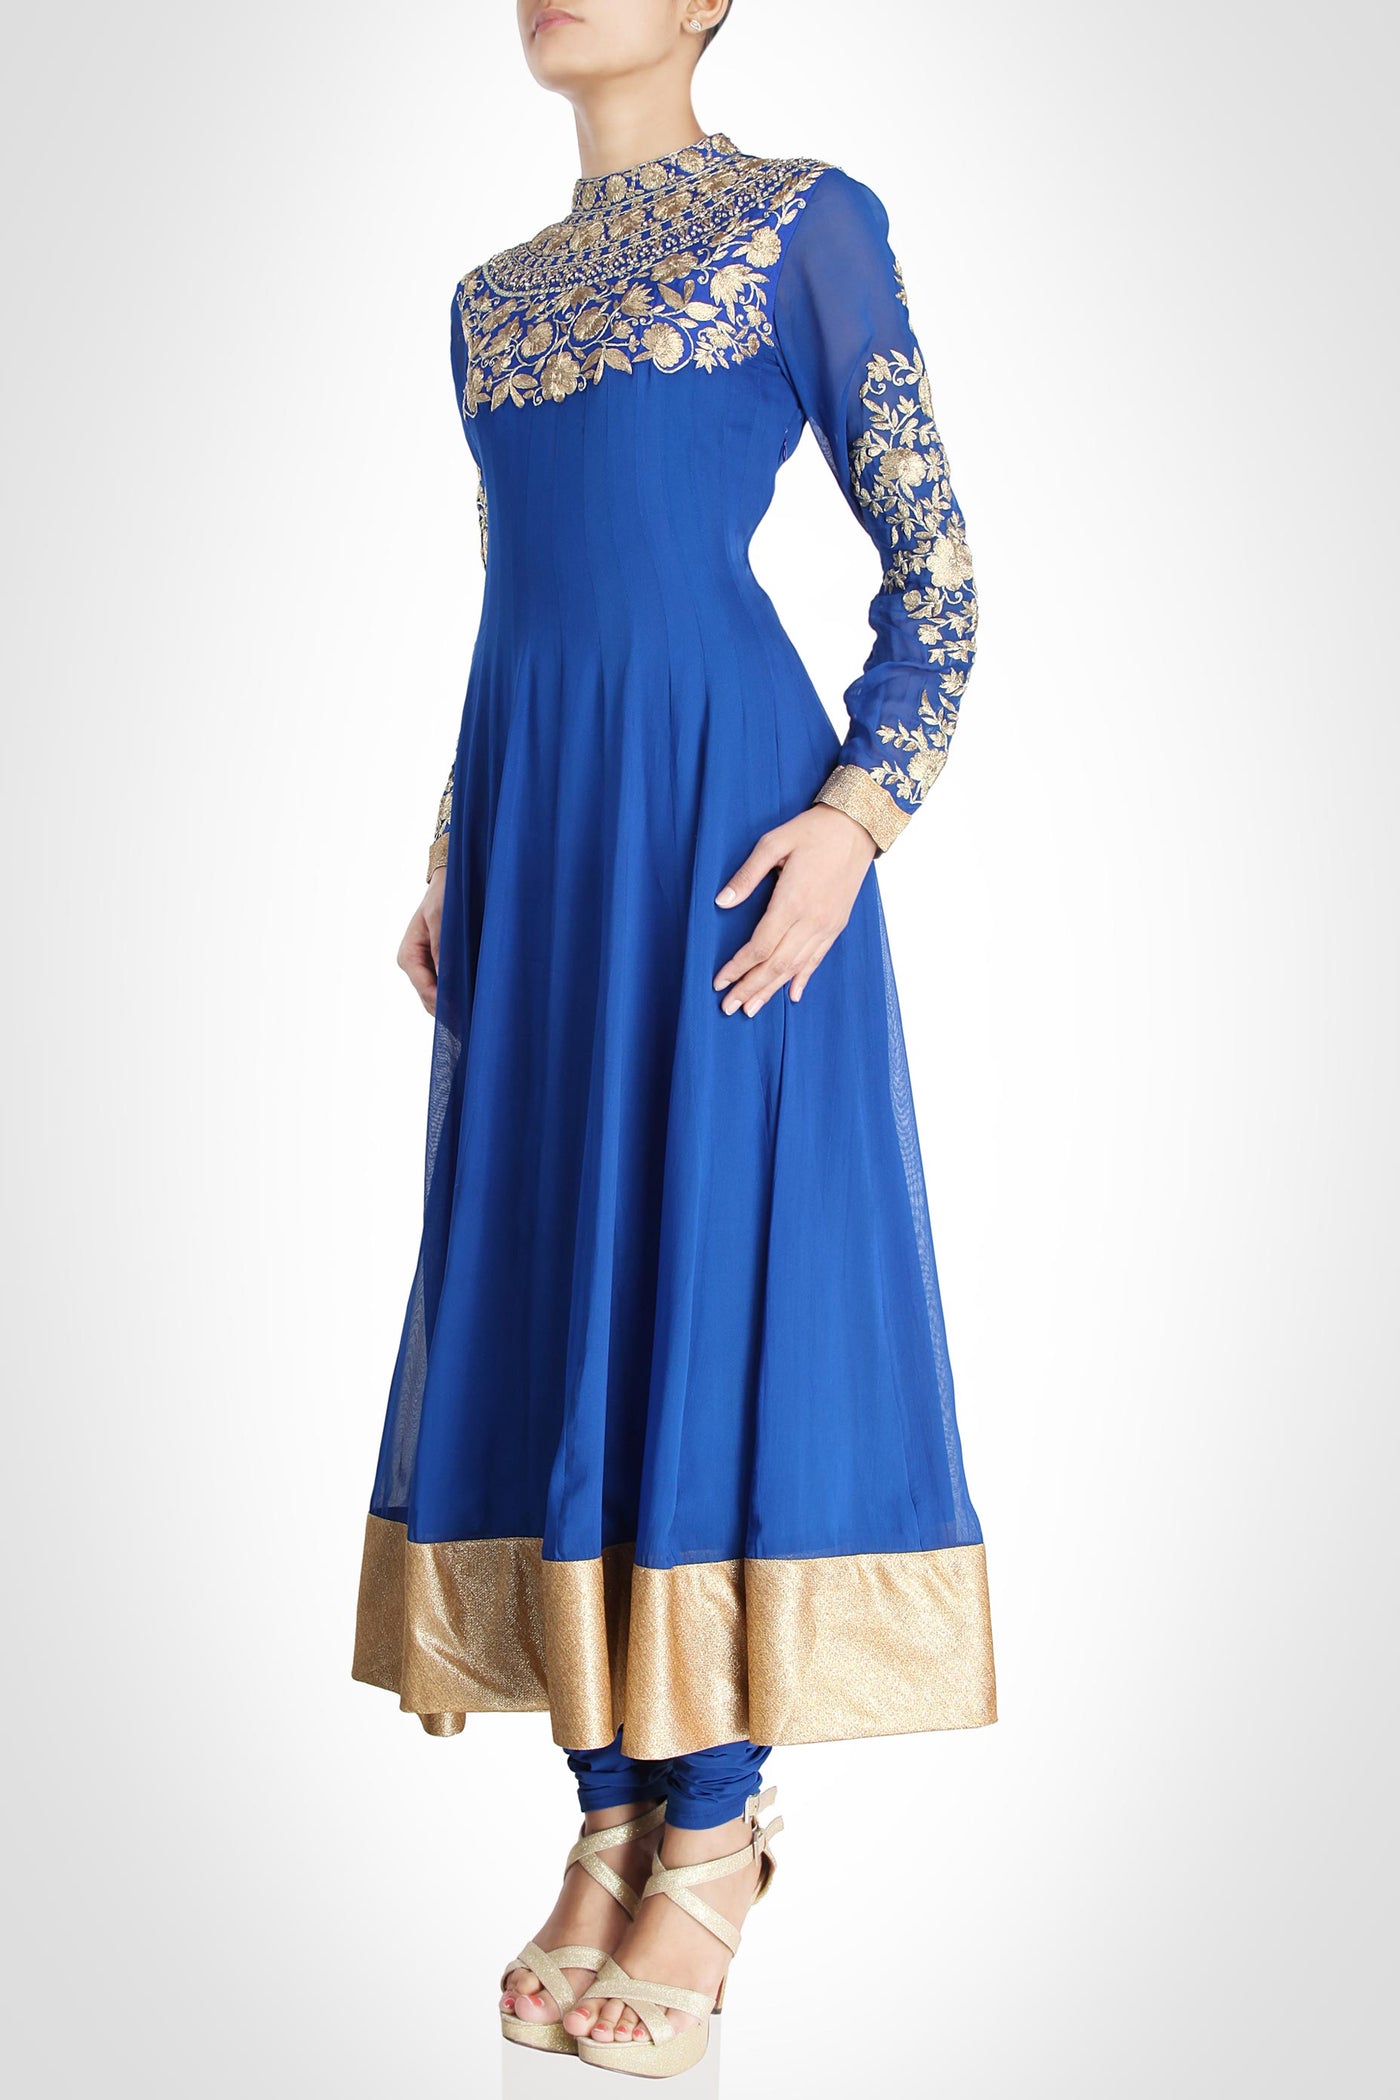 Gota Saini Anarkali: Blue Indian Clothing in Denver, CO, Aurora, CO, Boulder, CO, Fort Collins, CO, Colorado Springs, CO, Parker, CO, Highlands Ranch, CO, Cherry Creek, CO, Centennial, CO, and Longmont, CO. NATIONWIDE SHIPPING USA- India Fashion X